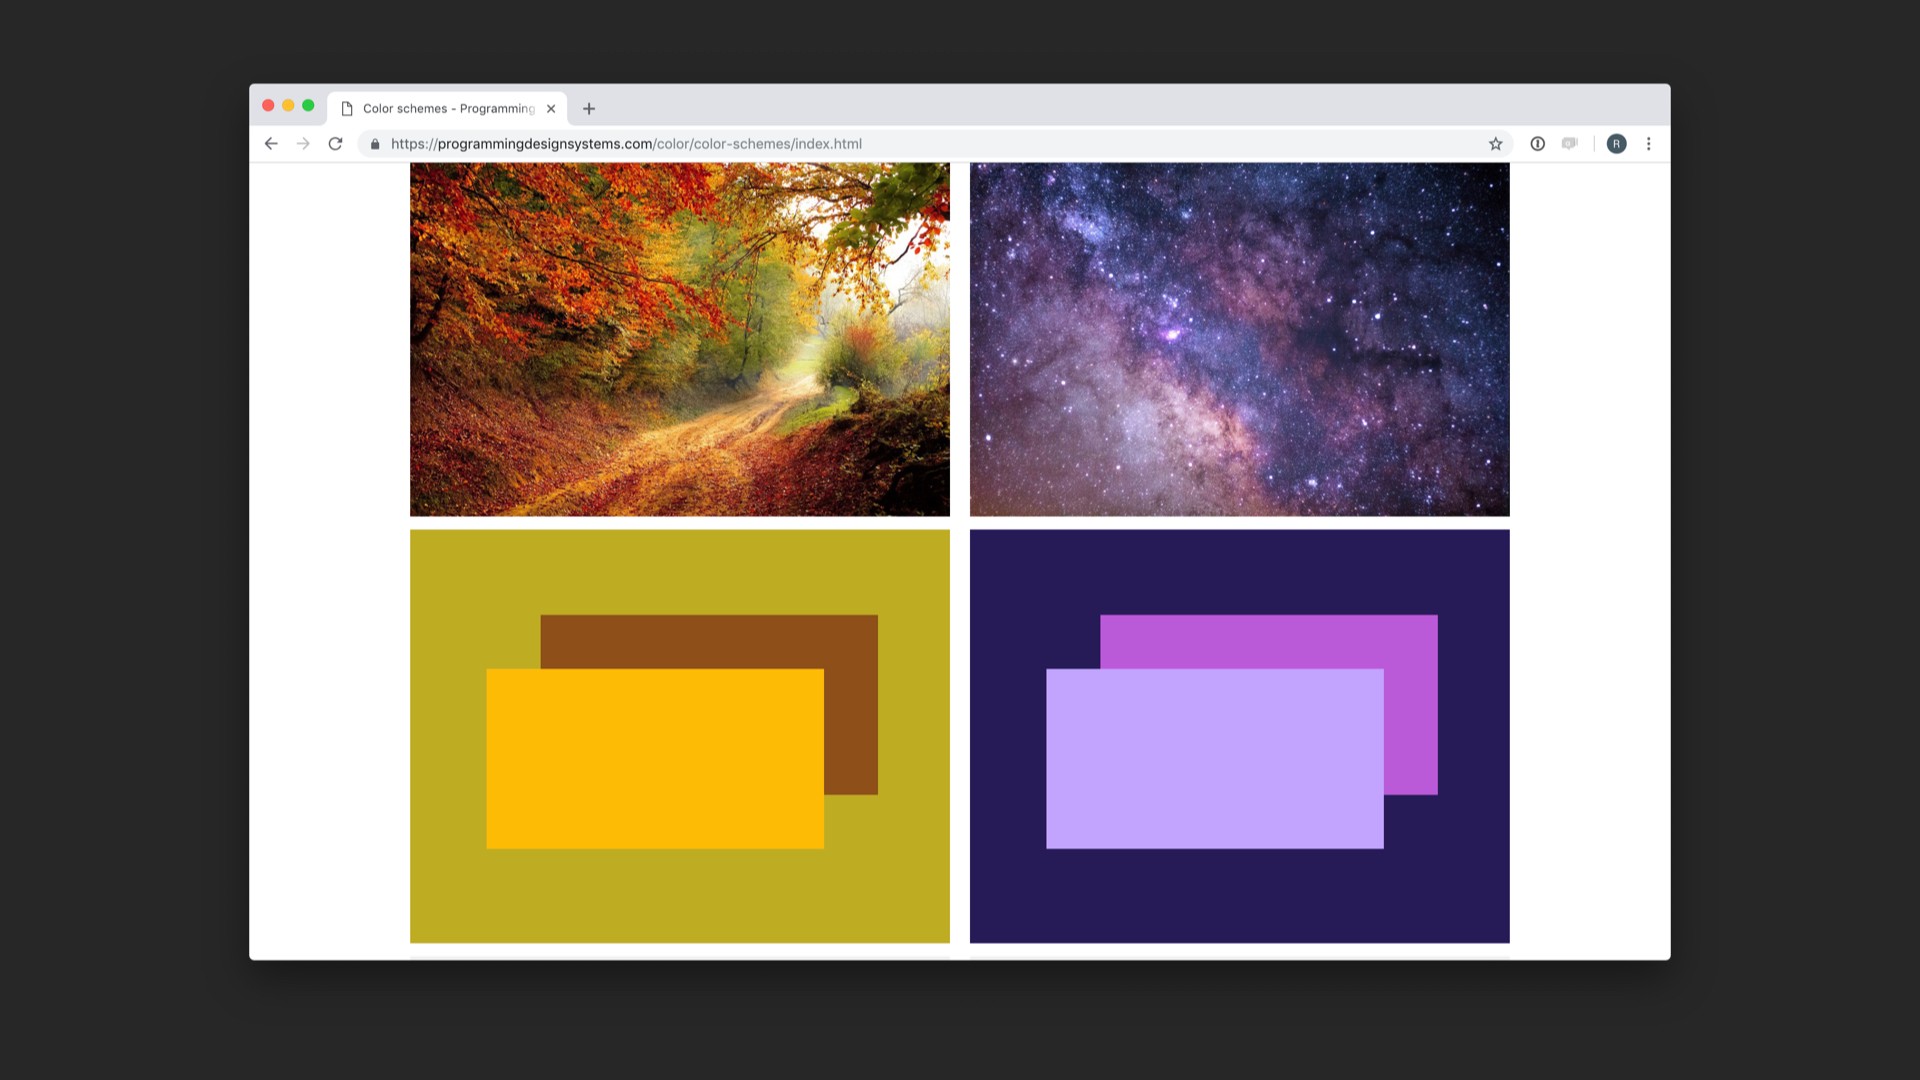 Screenshot of color hue examples in pictures in referenced website.